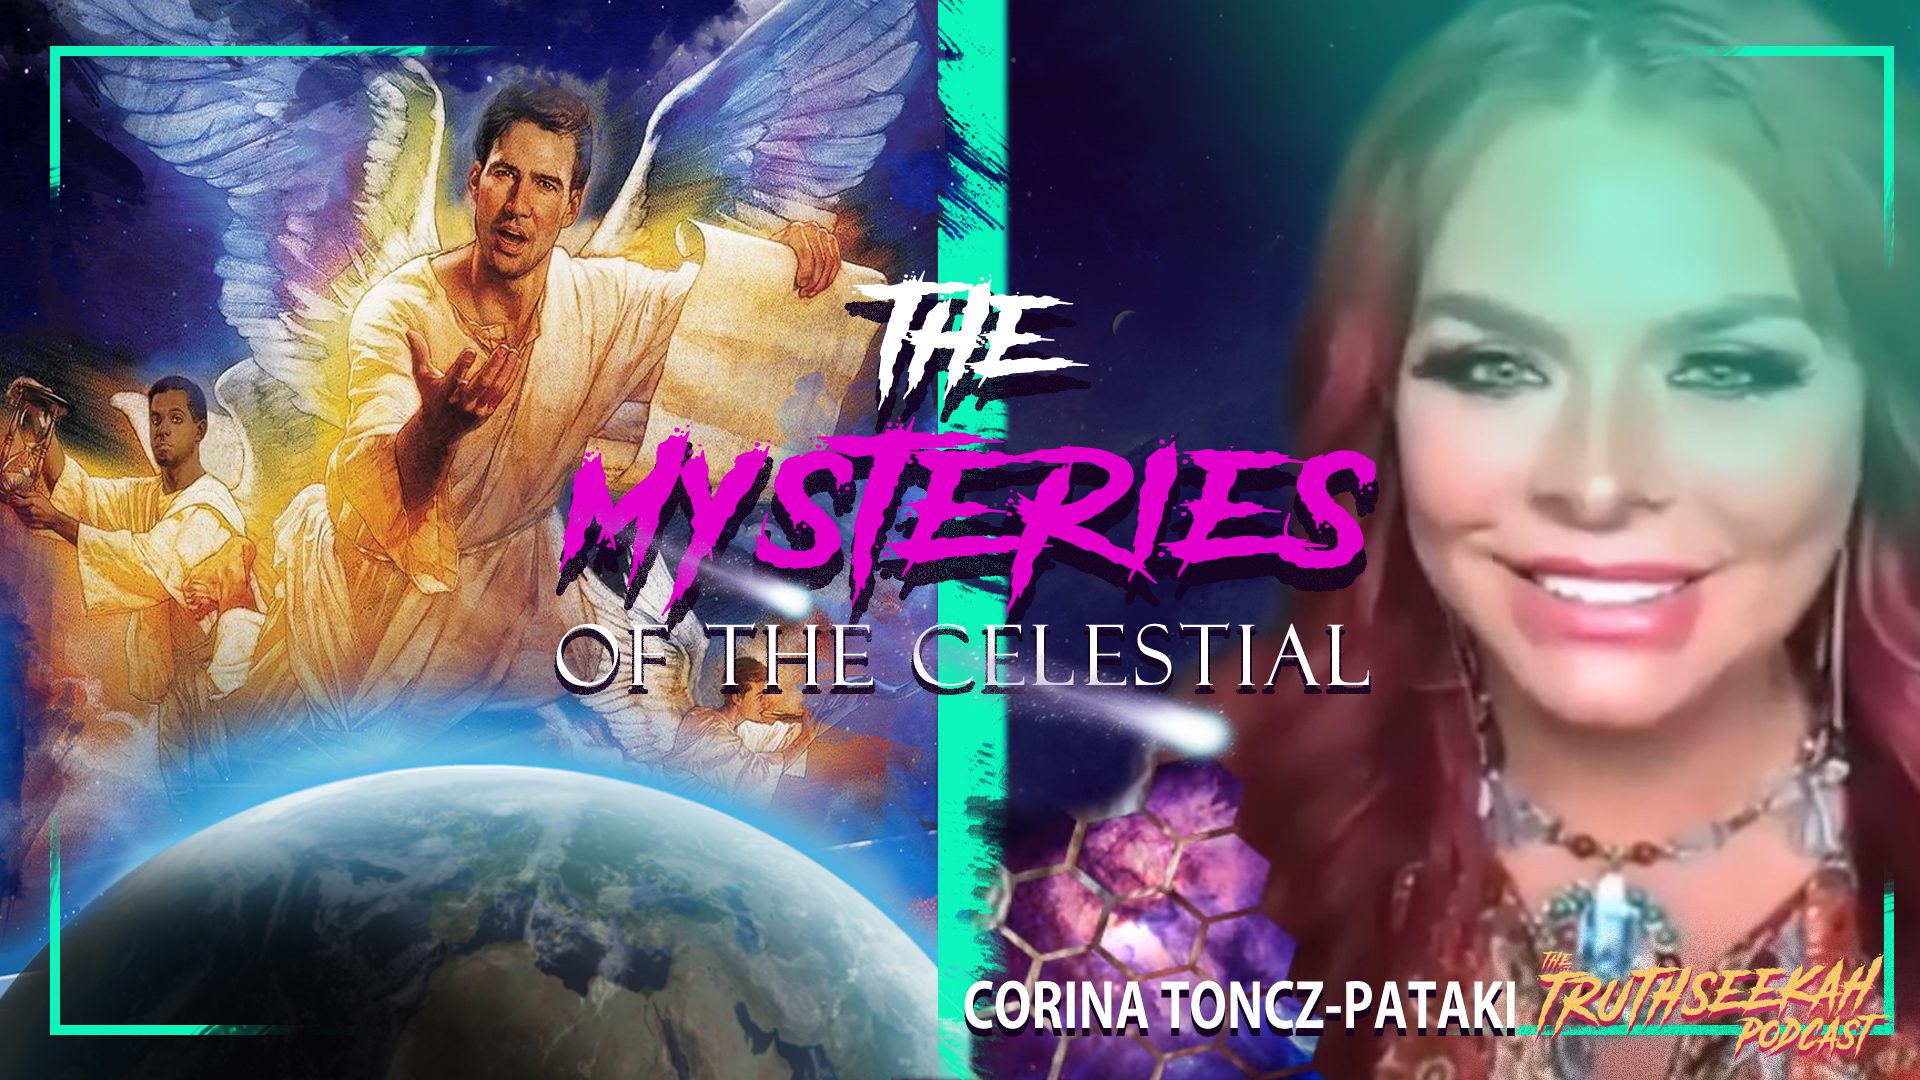 Corina Toncz-Pataki | UNVEILING THE MYSTERIES OF THE CELESTIAL | TruthSeekah Podcast